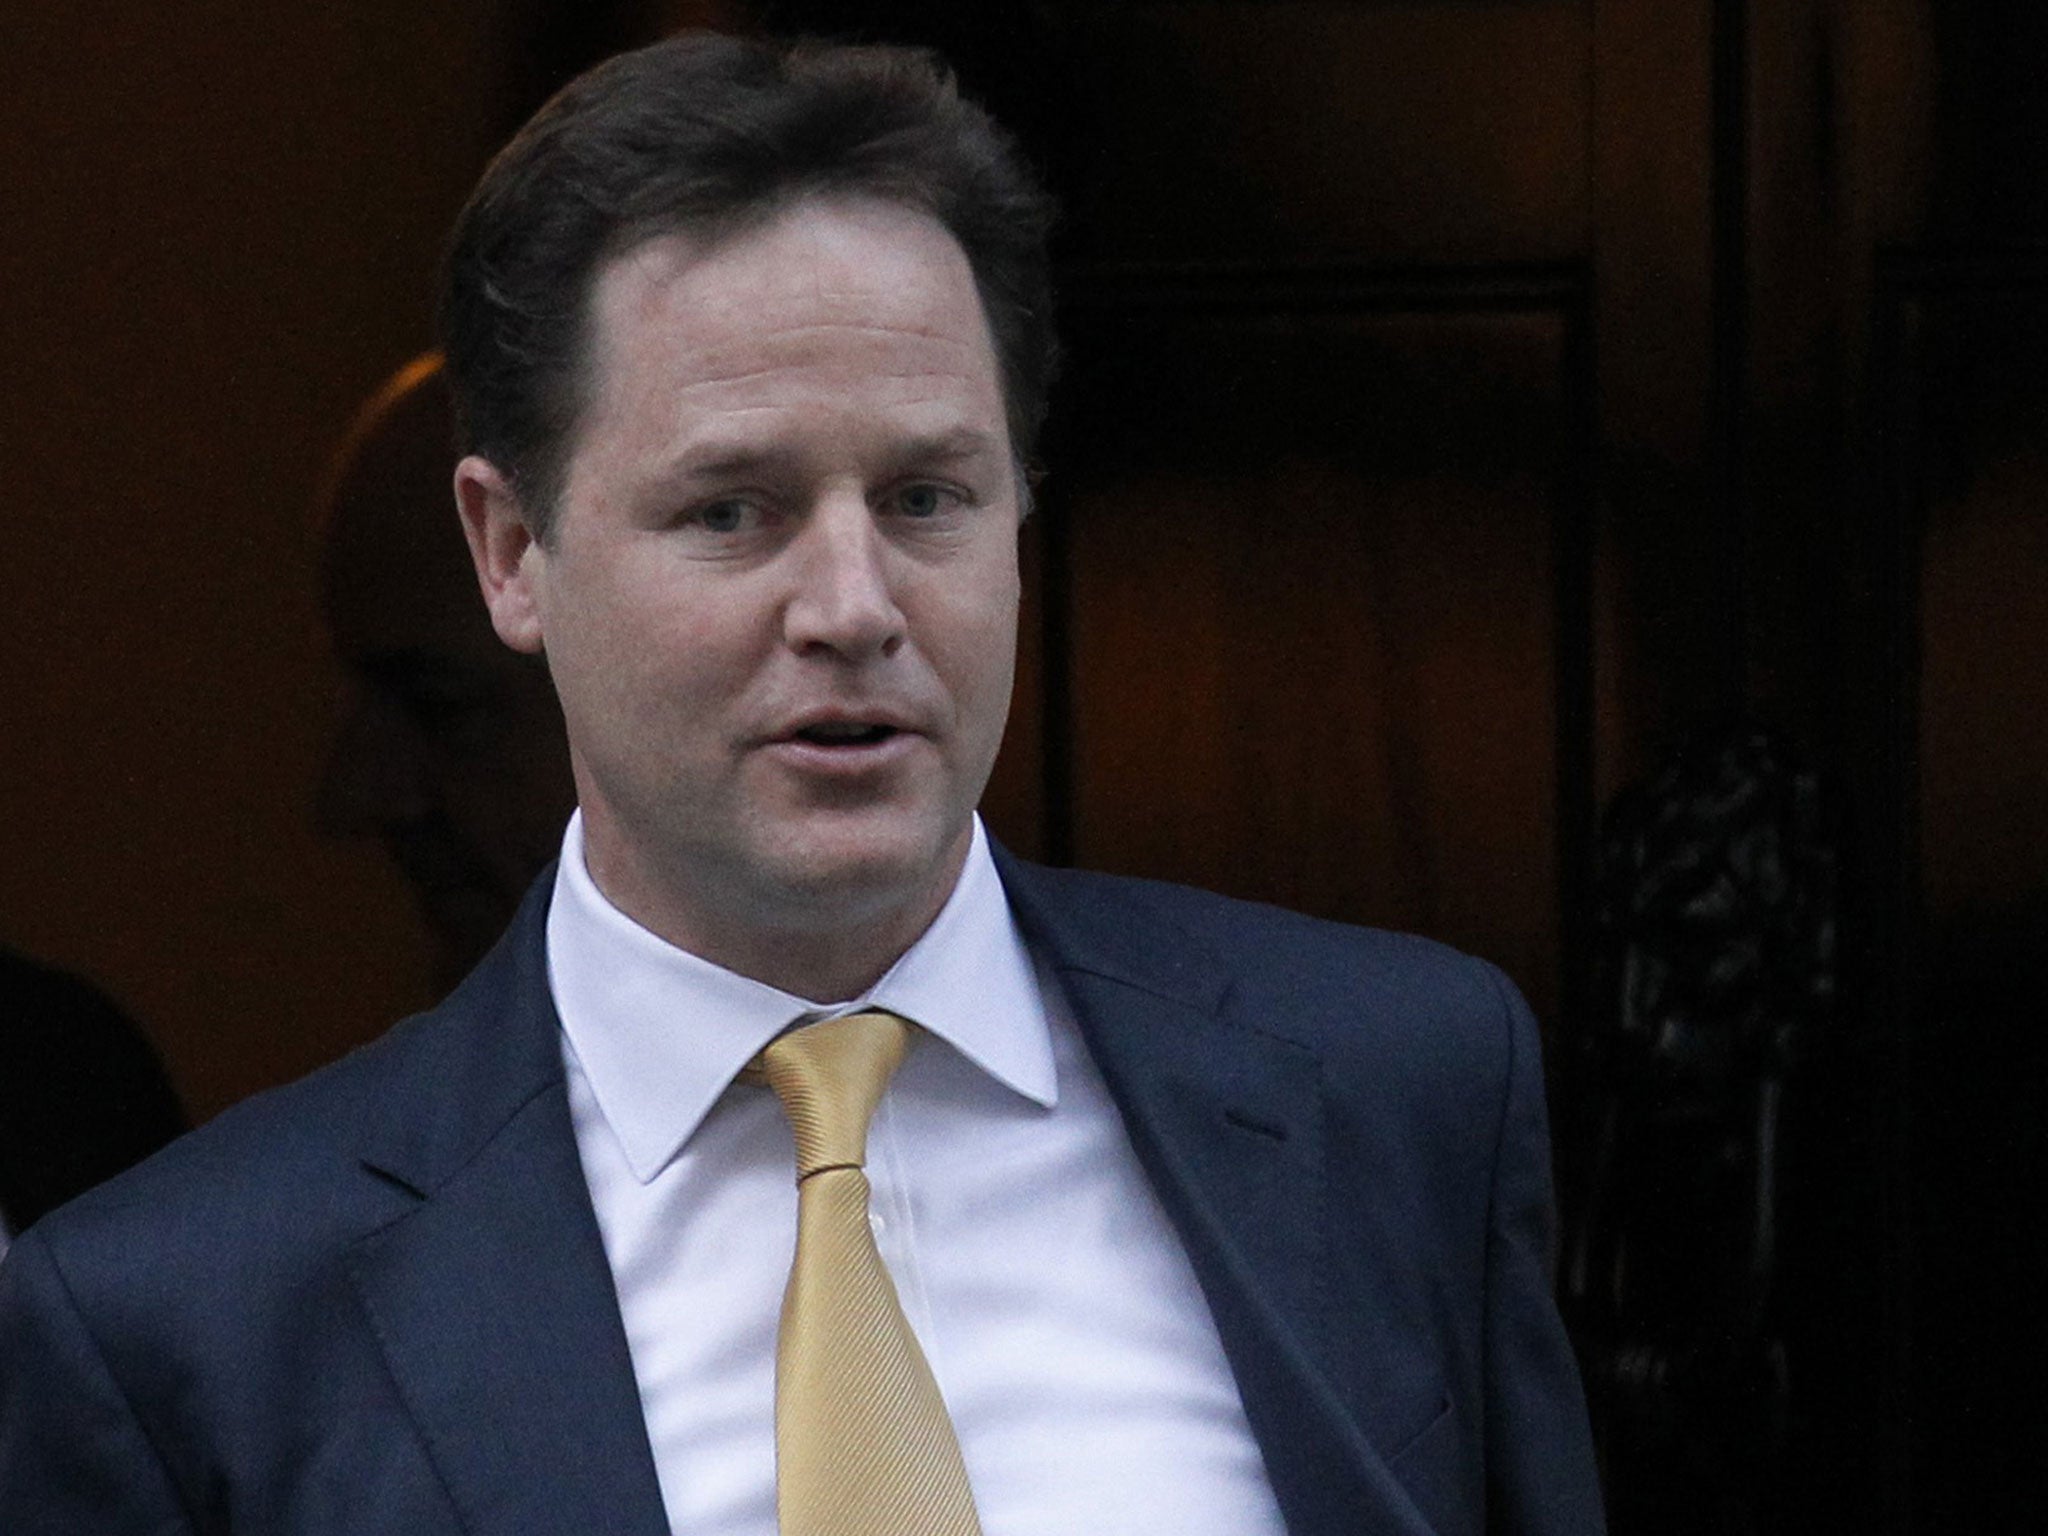 The deputy prime minister also committed the Liberal Democrats to a major review of drugs policy in the 2015 election manifesto, and urged David Cameron to look at issues such as decriminalisation or legalisation.